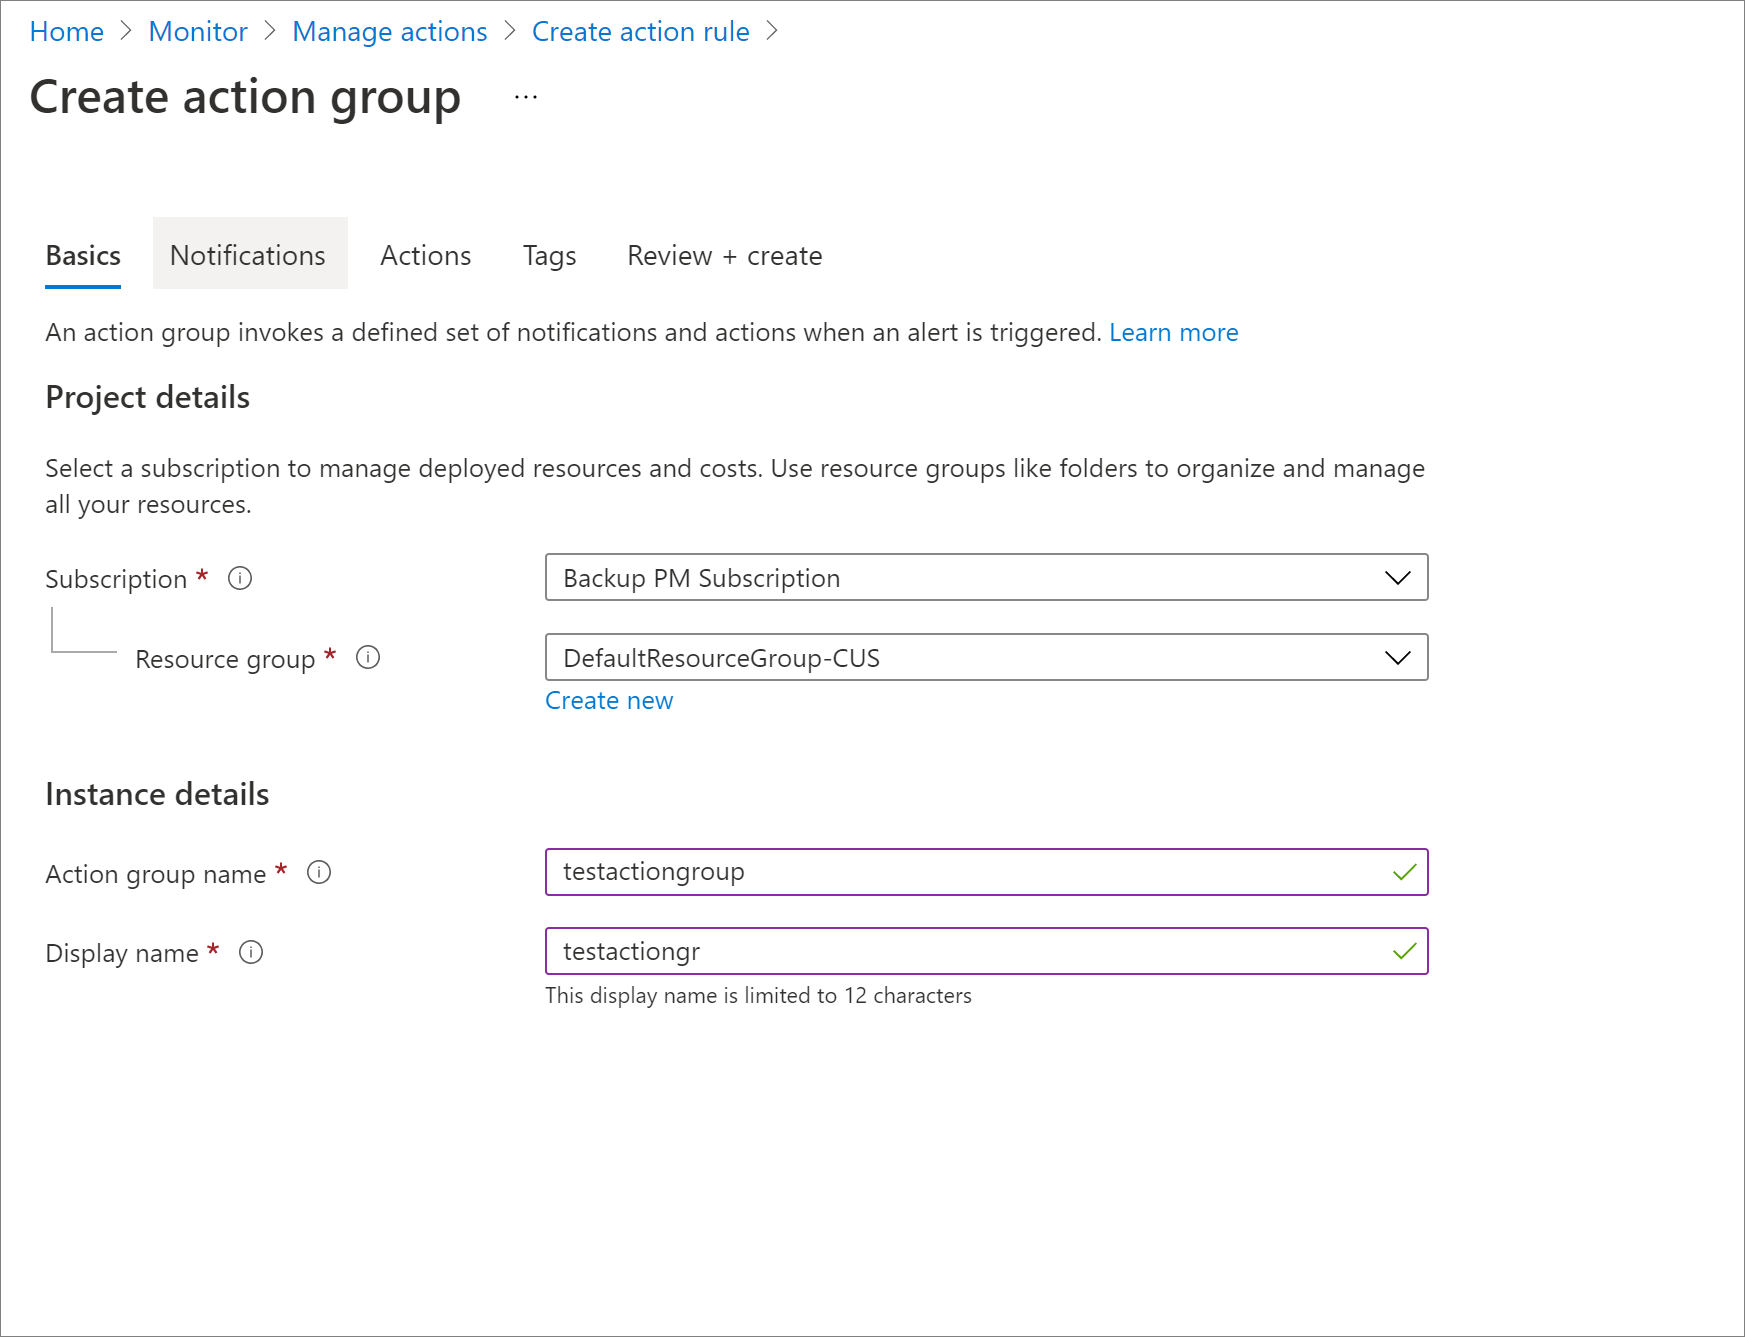 Screenshot for basic properties of action group.